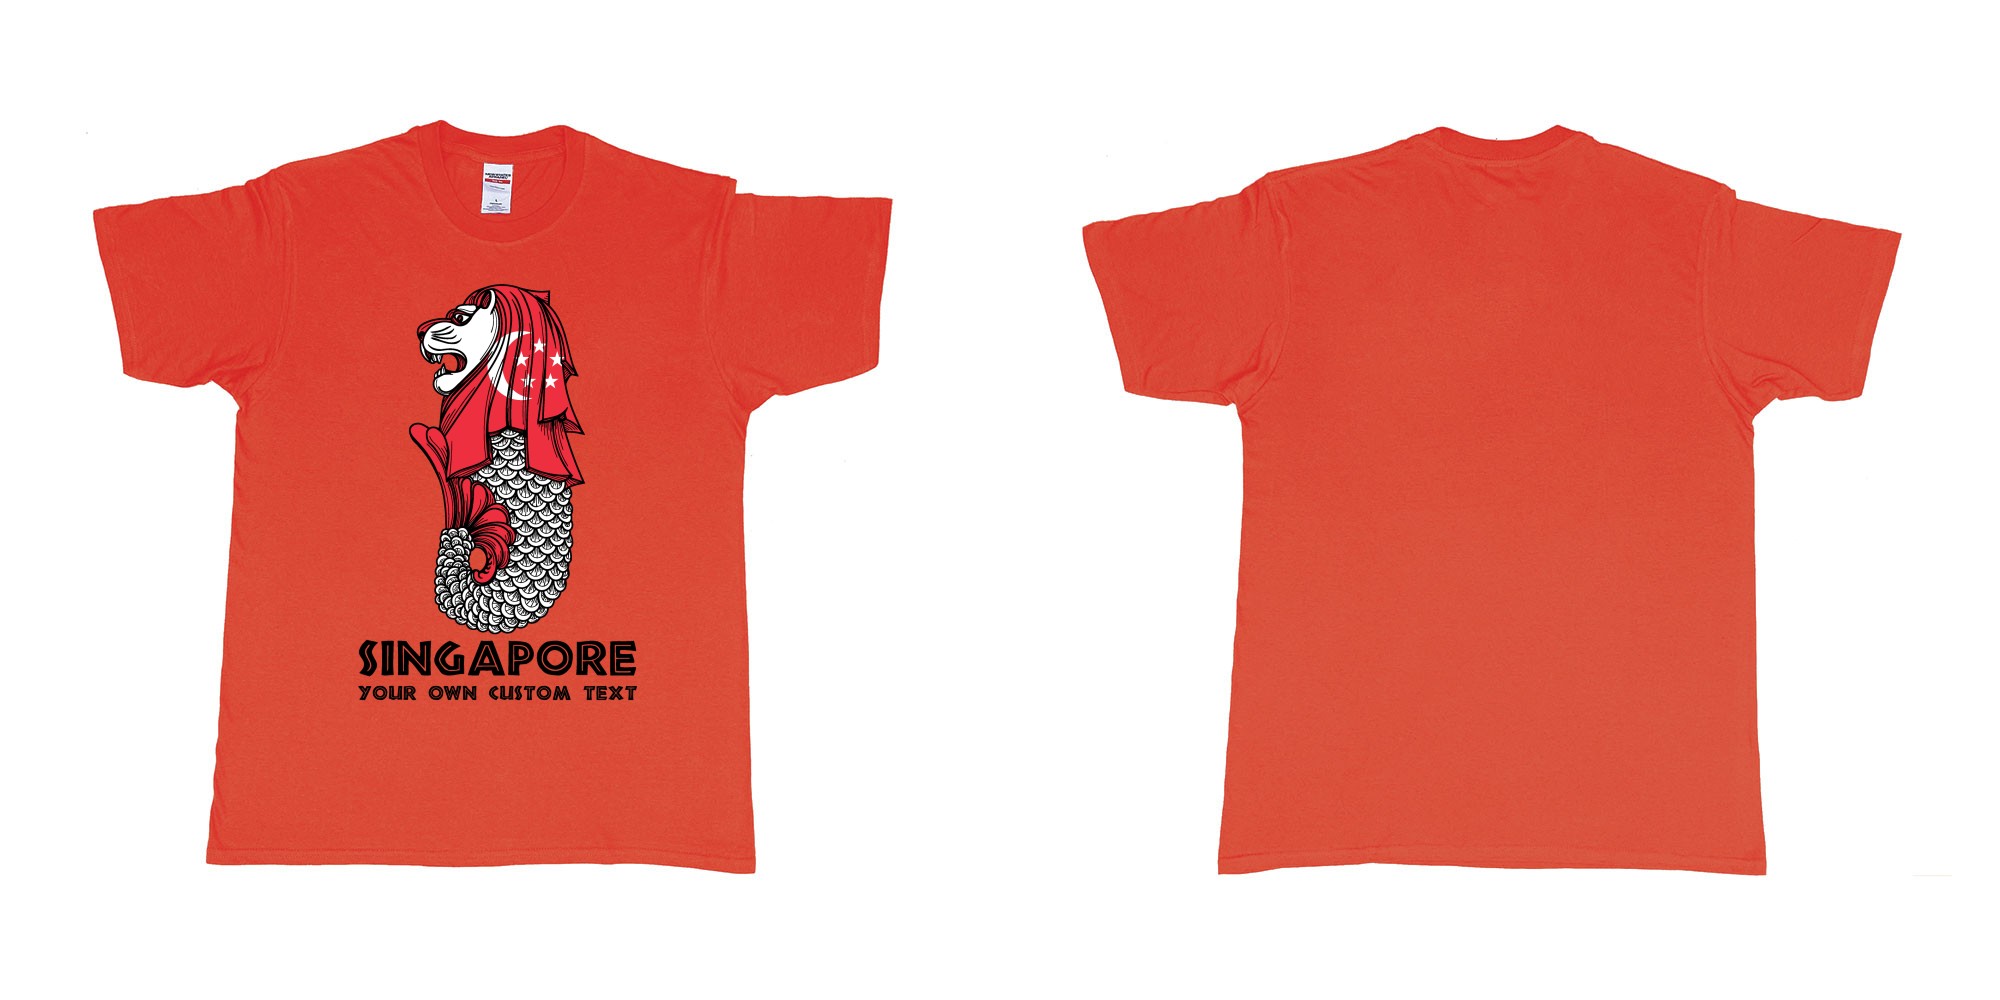 Custom tshirt design merlion singapore mascot statue lion in fabric color red choice your own text made in Bali by The Pirate Way